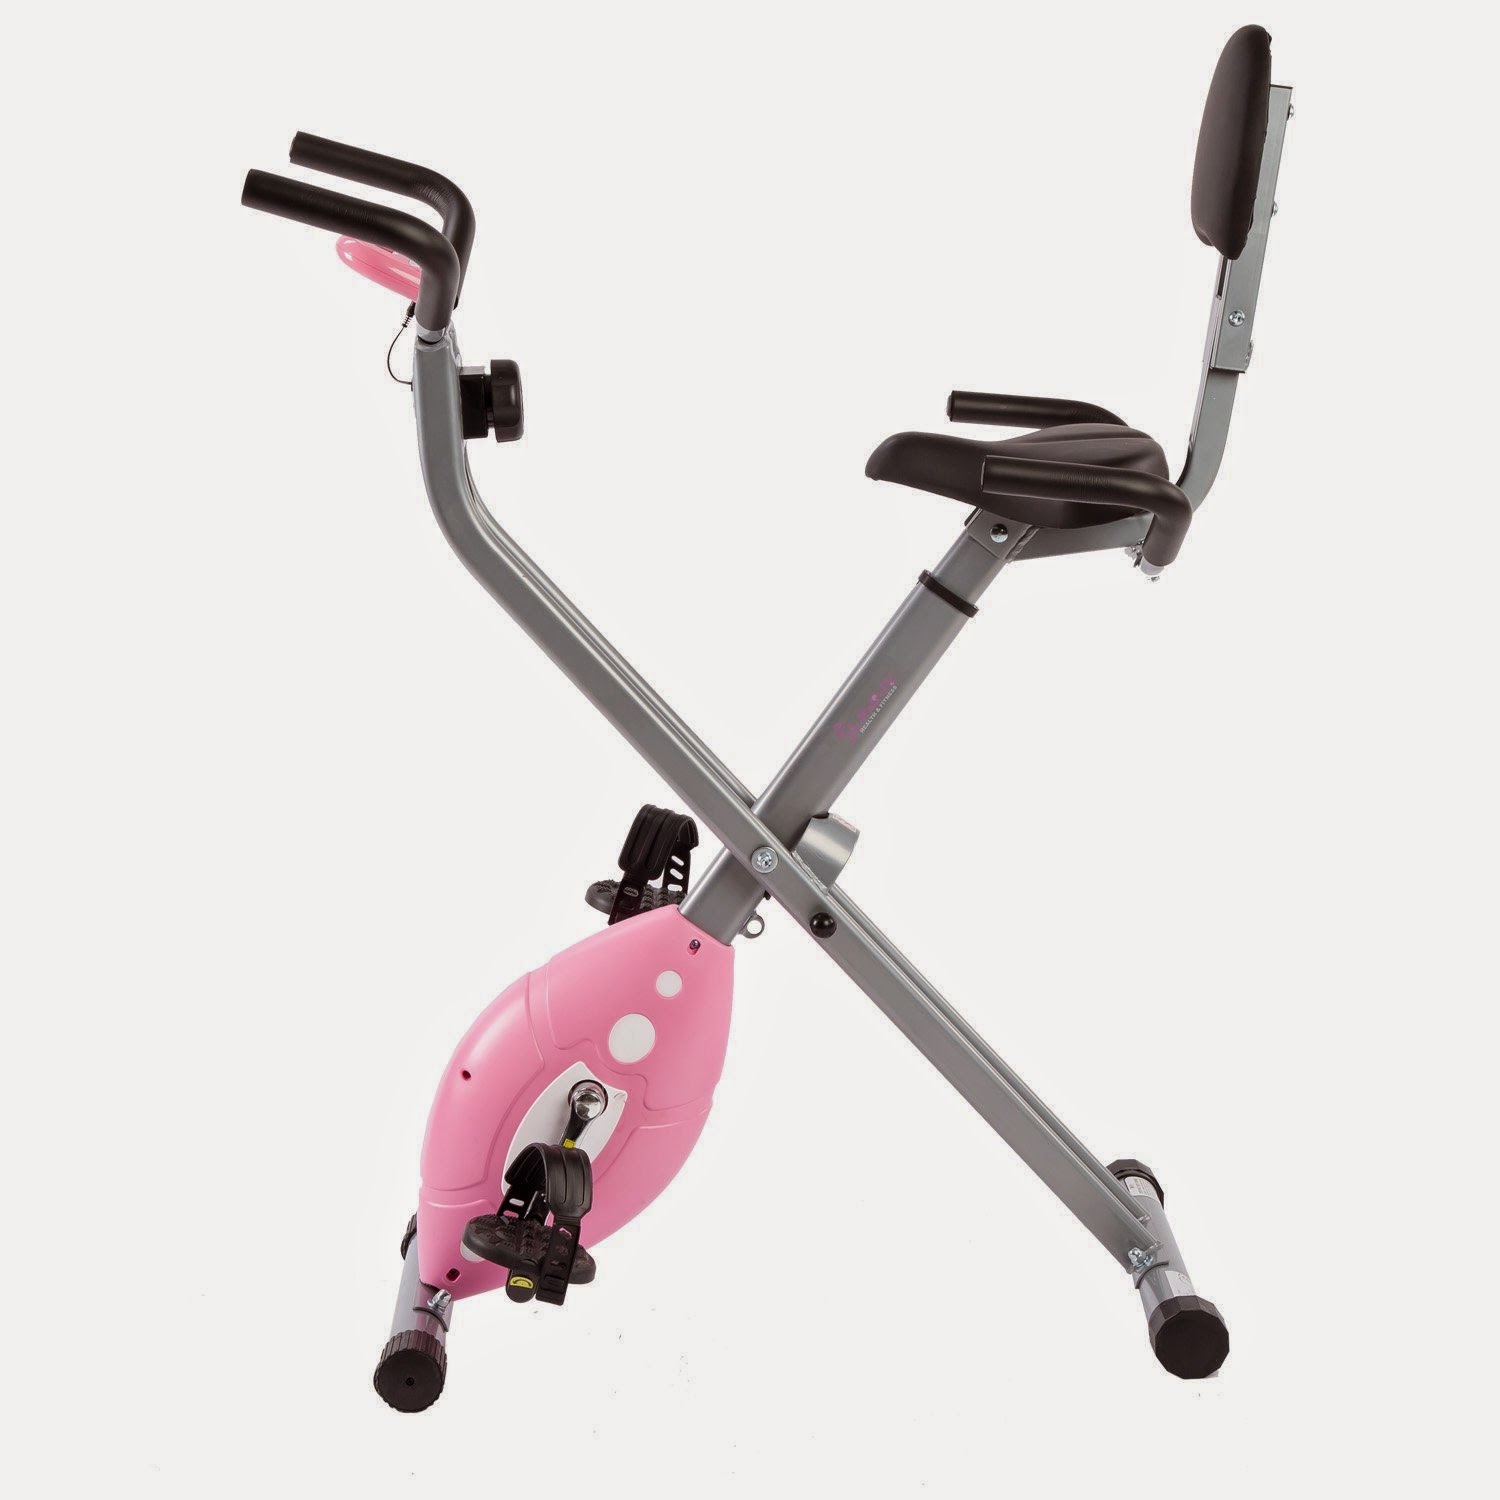 Sunny Pink Folding Recumbent Bike, review, with 8 levels of adjustable tension, cushioned seat with back support, compact, folding frame design for easy storage